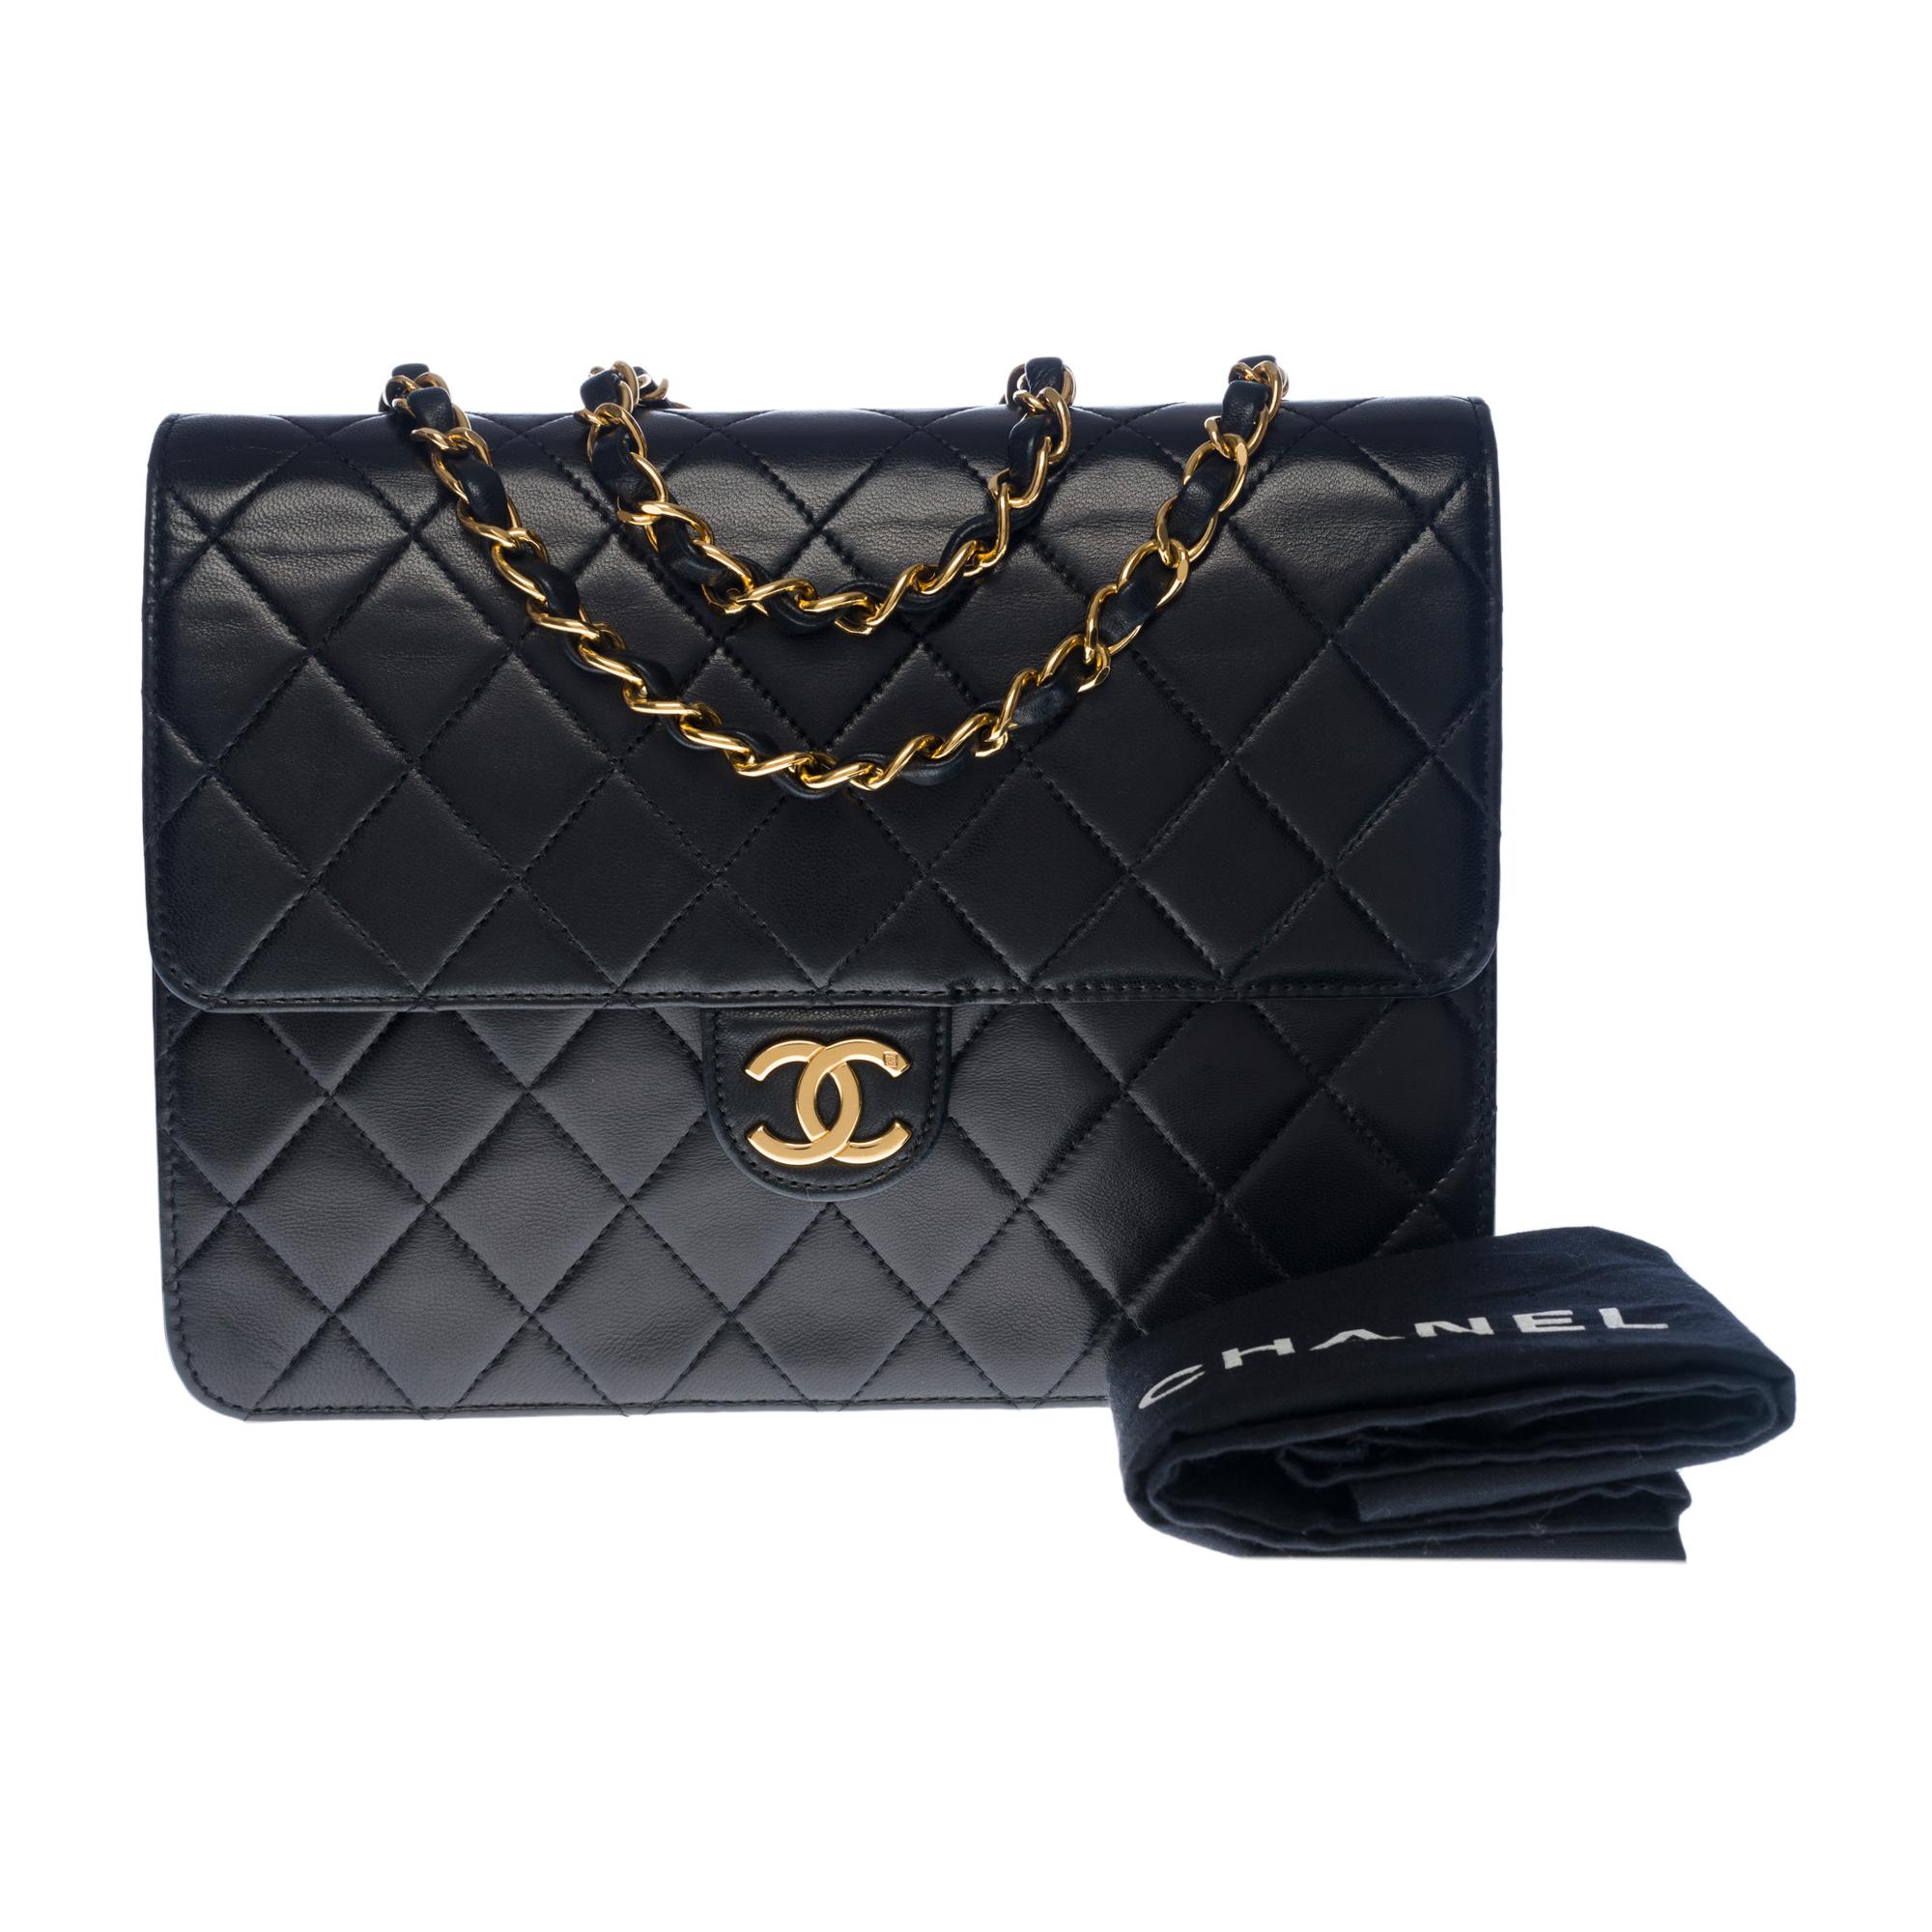 Amazing Chanel Classic Flap shoulder bag in black quilted lambskin, GHW 7